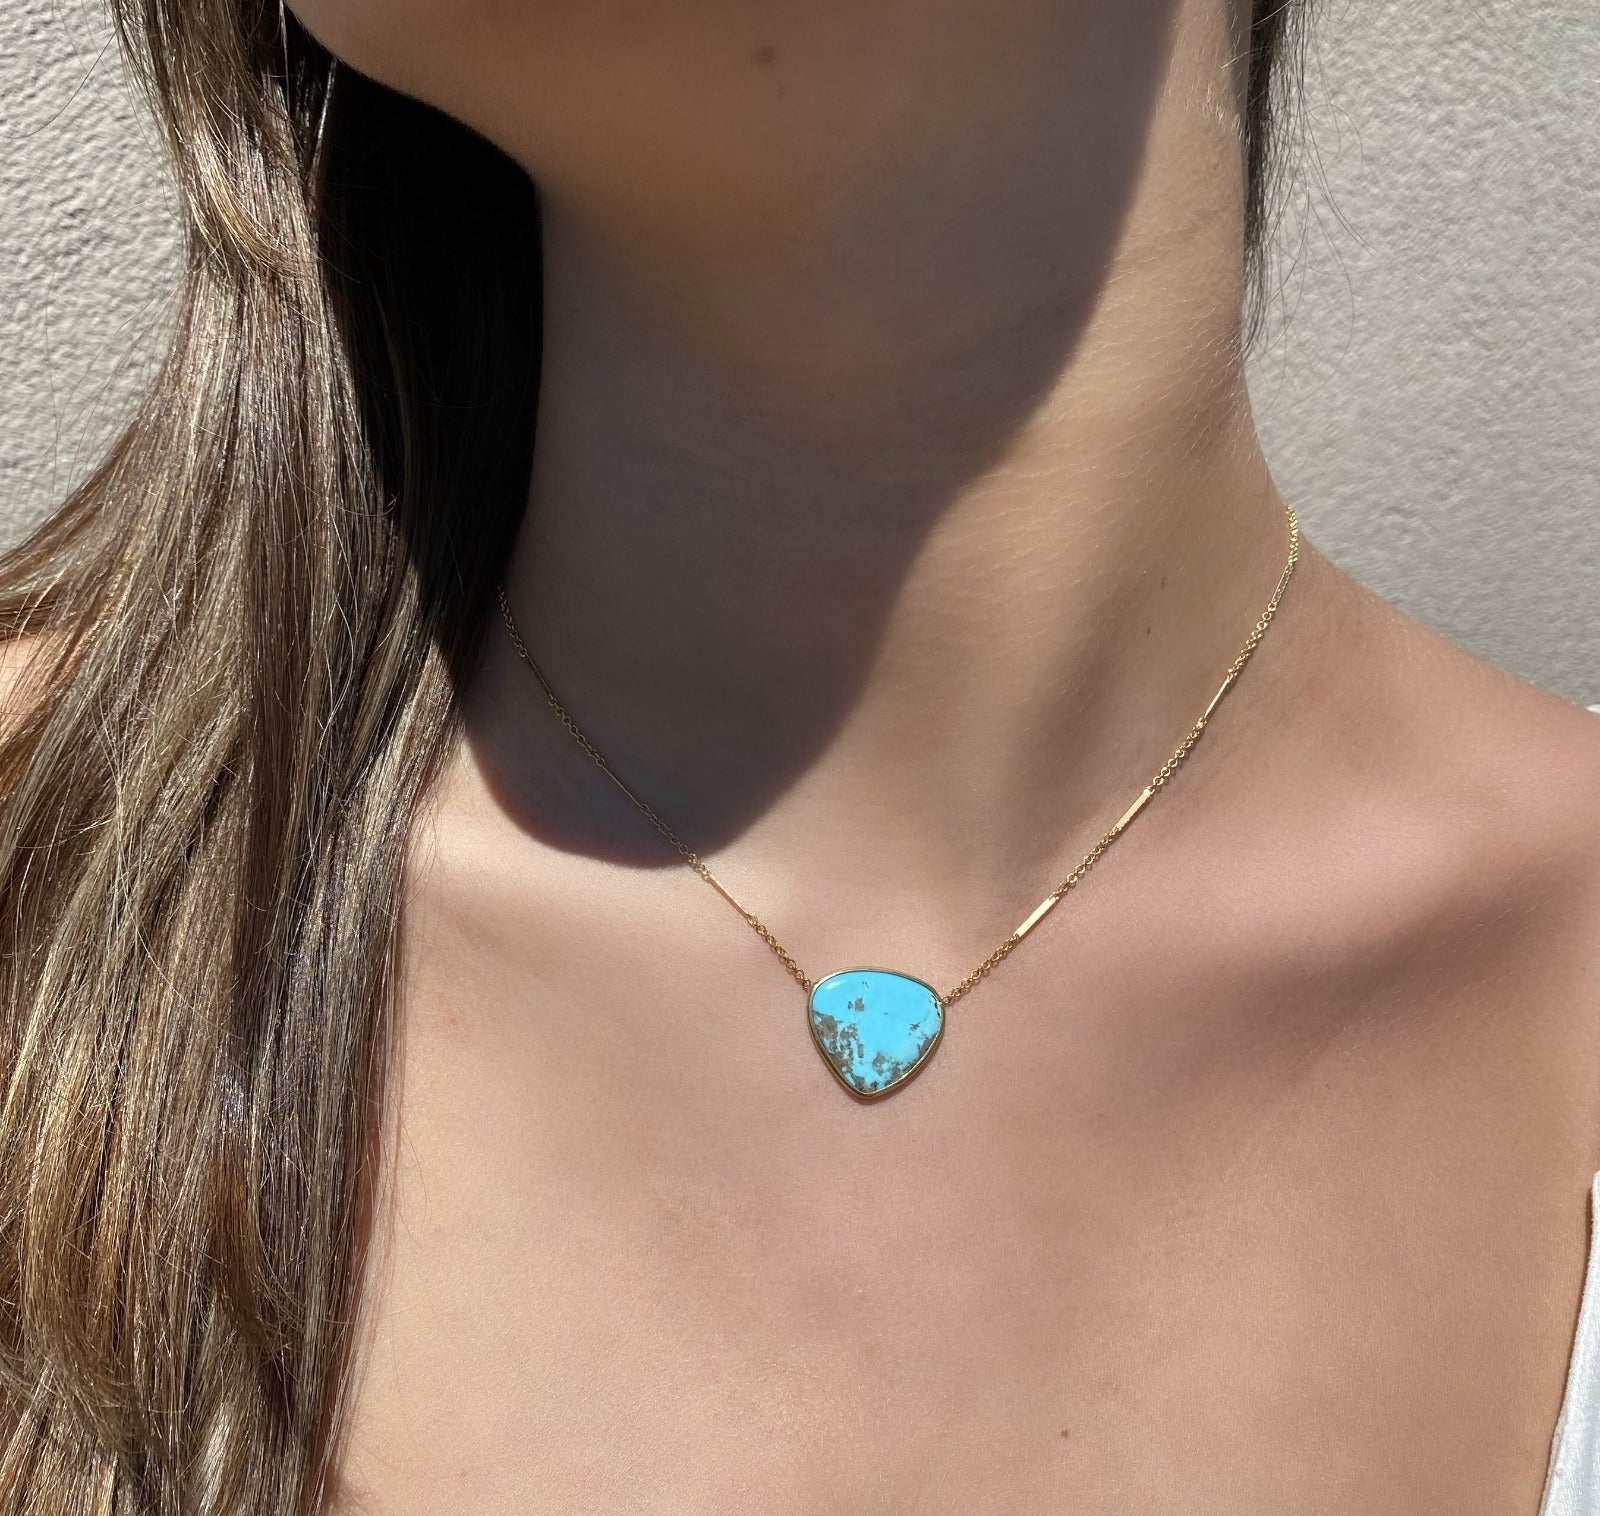 Gold Filled - Upside Down Teardrop Kingsman Turquoise Necklace - Camille Jewelry